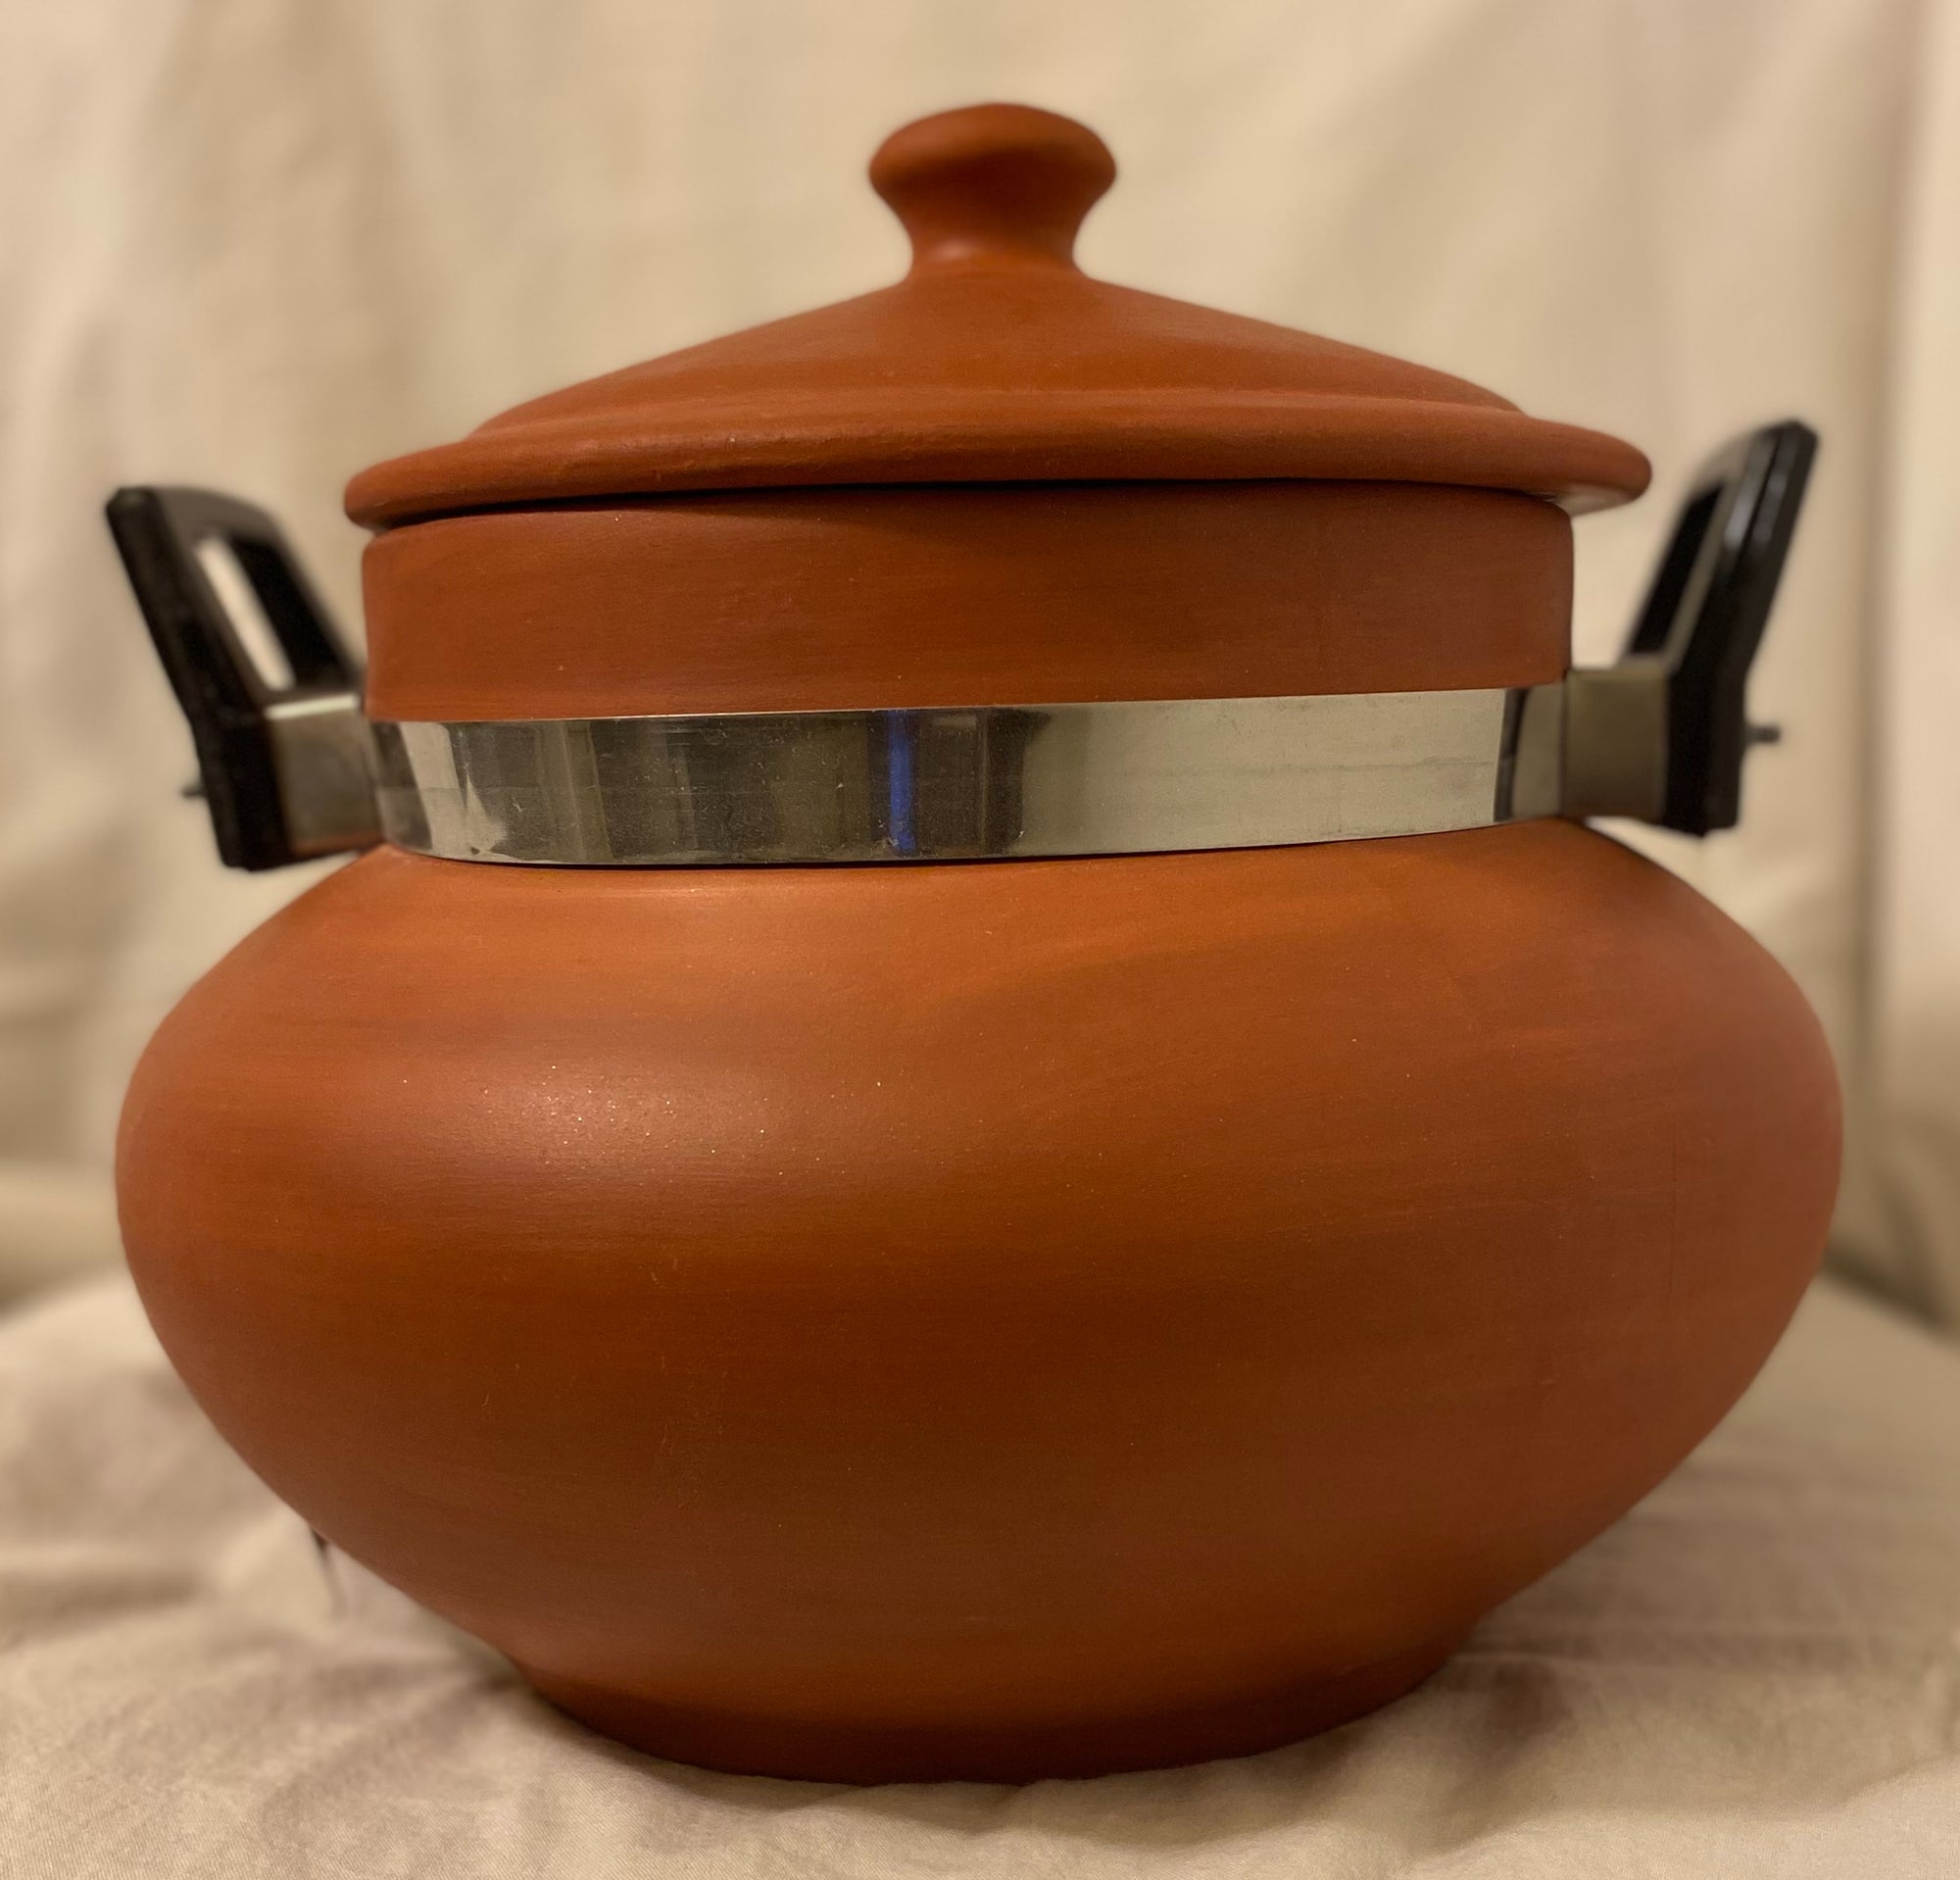 Clay Cooking pot. Terracotta Non-Glazed & Strong Natural Cookware / Serve  ware. 4 Lt - IndianOceanImports